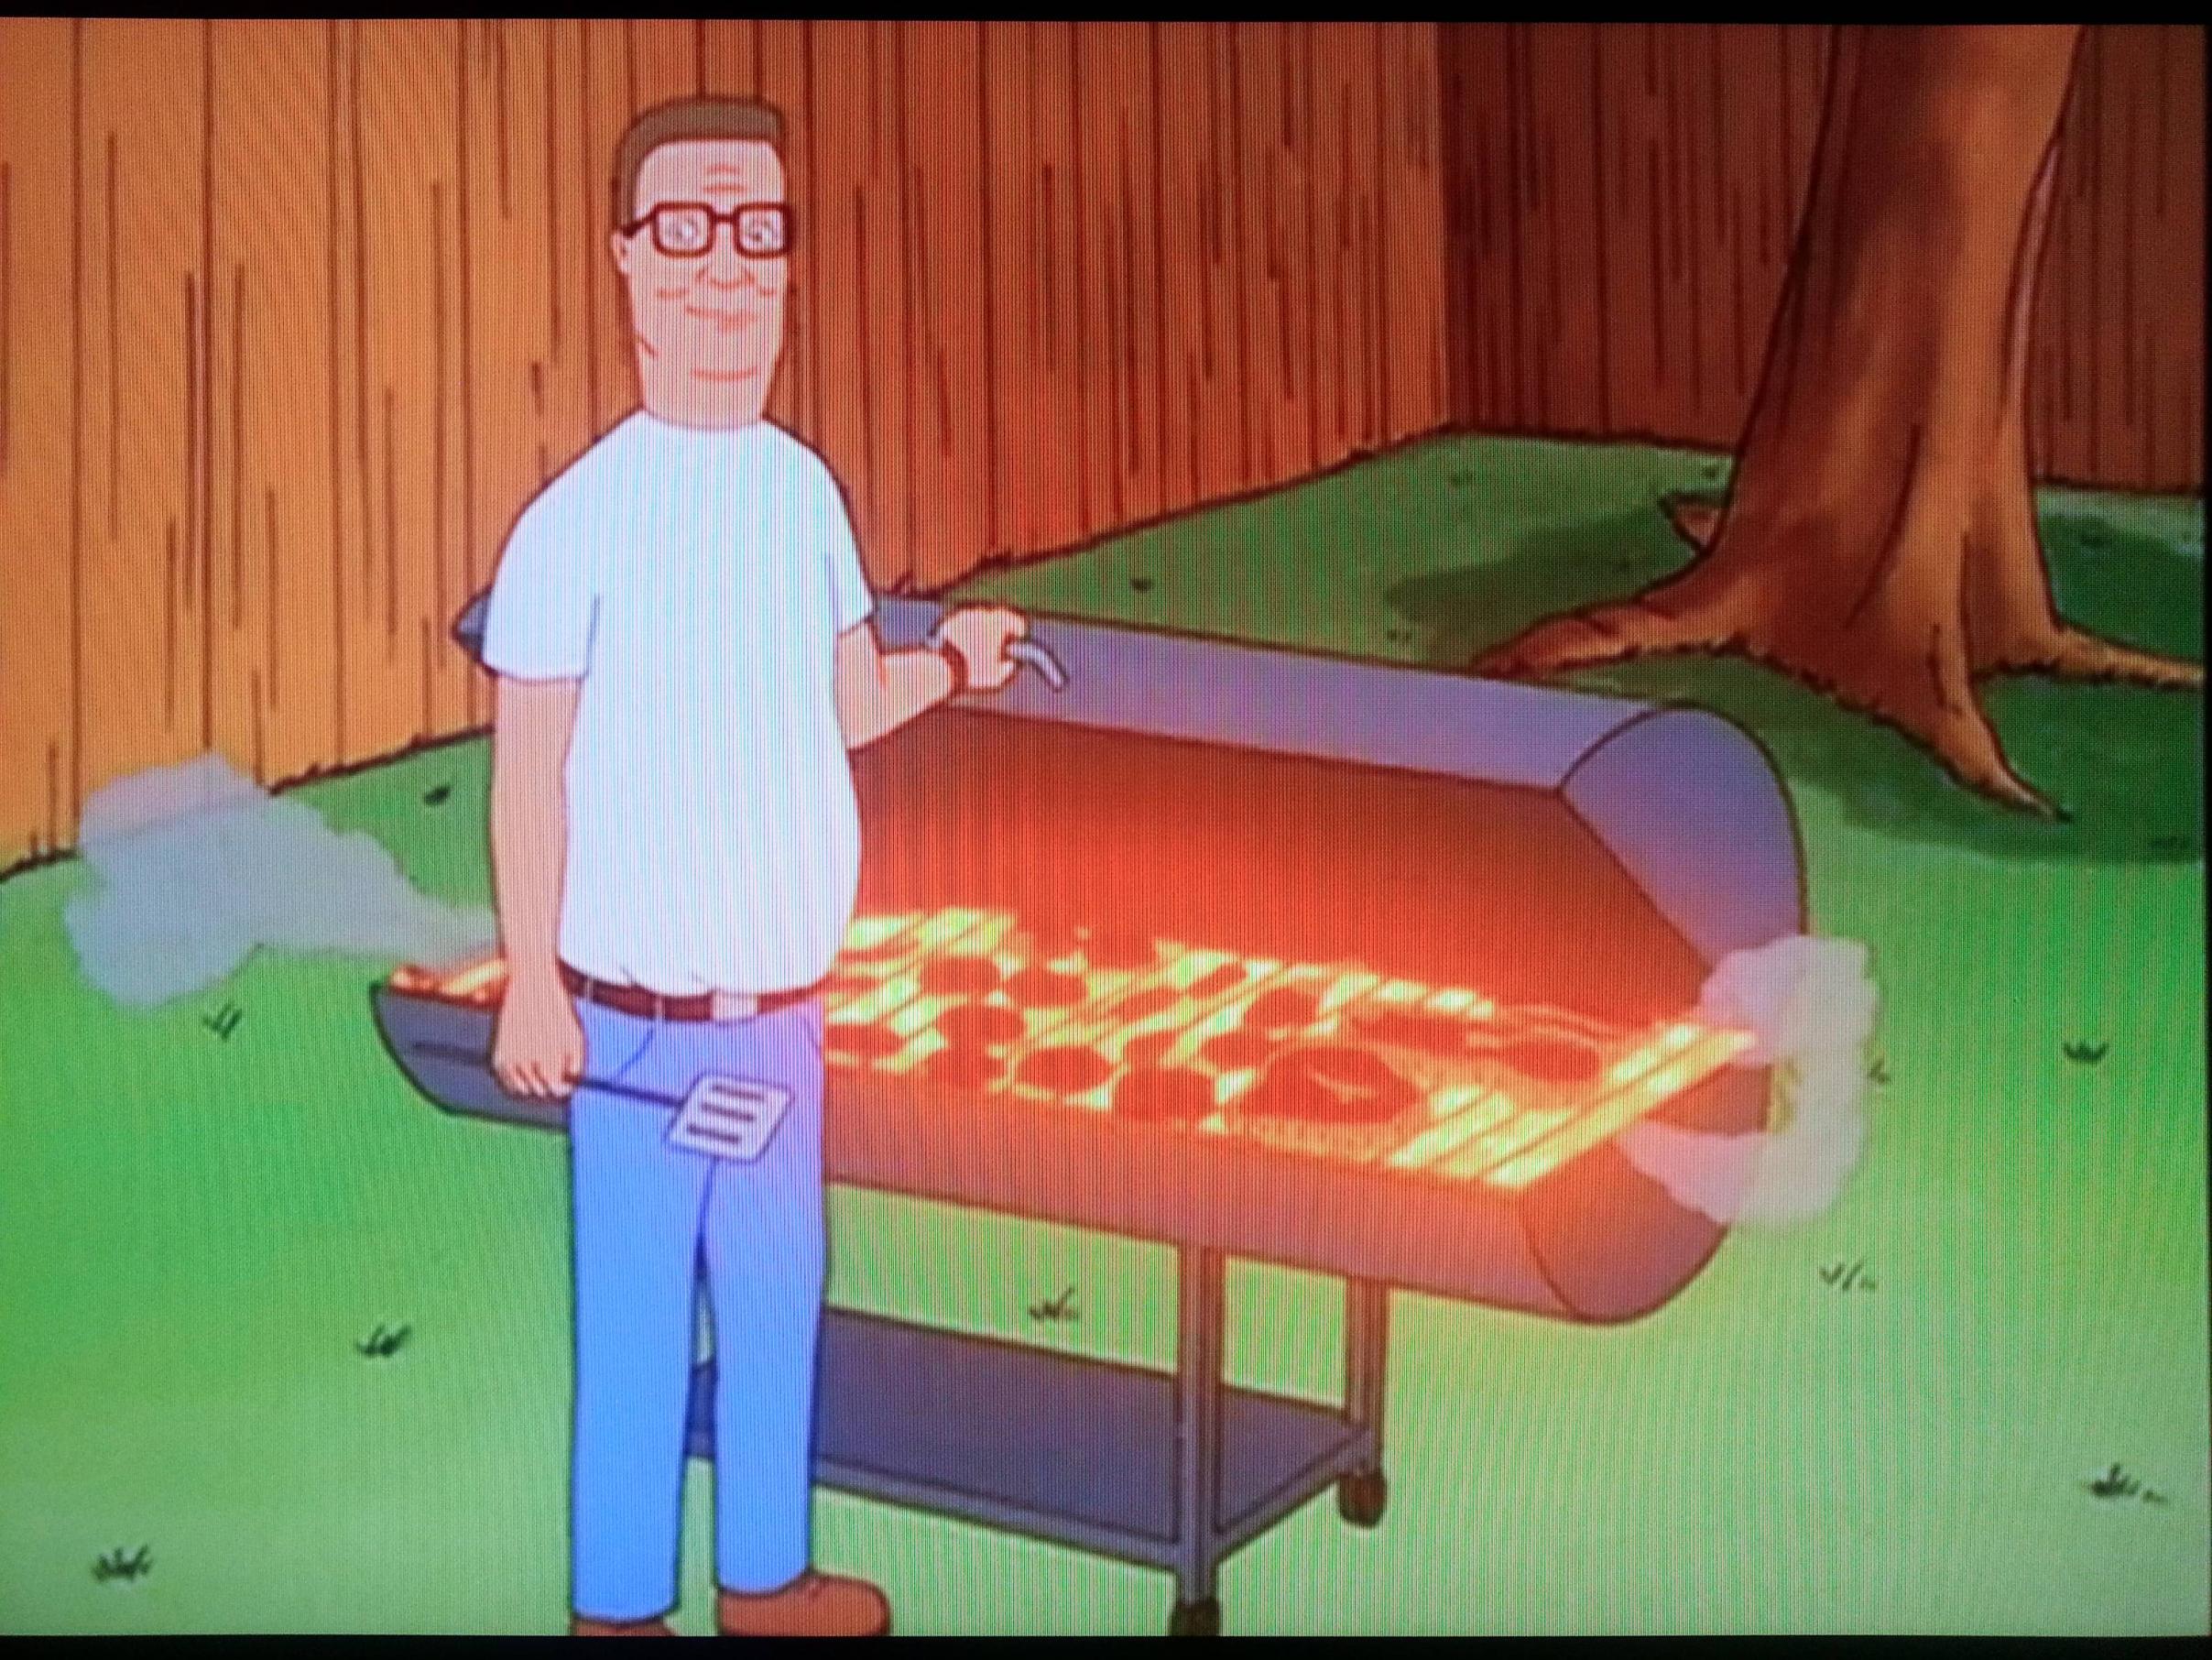 Hank Hill Propane Quotes About.